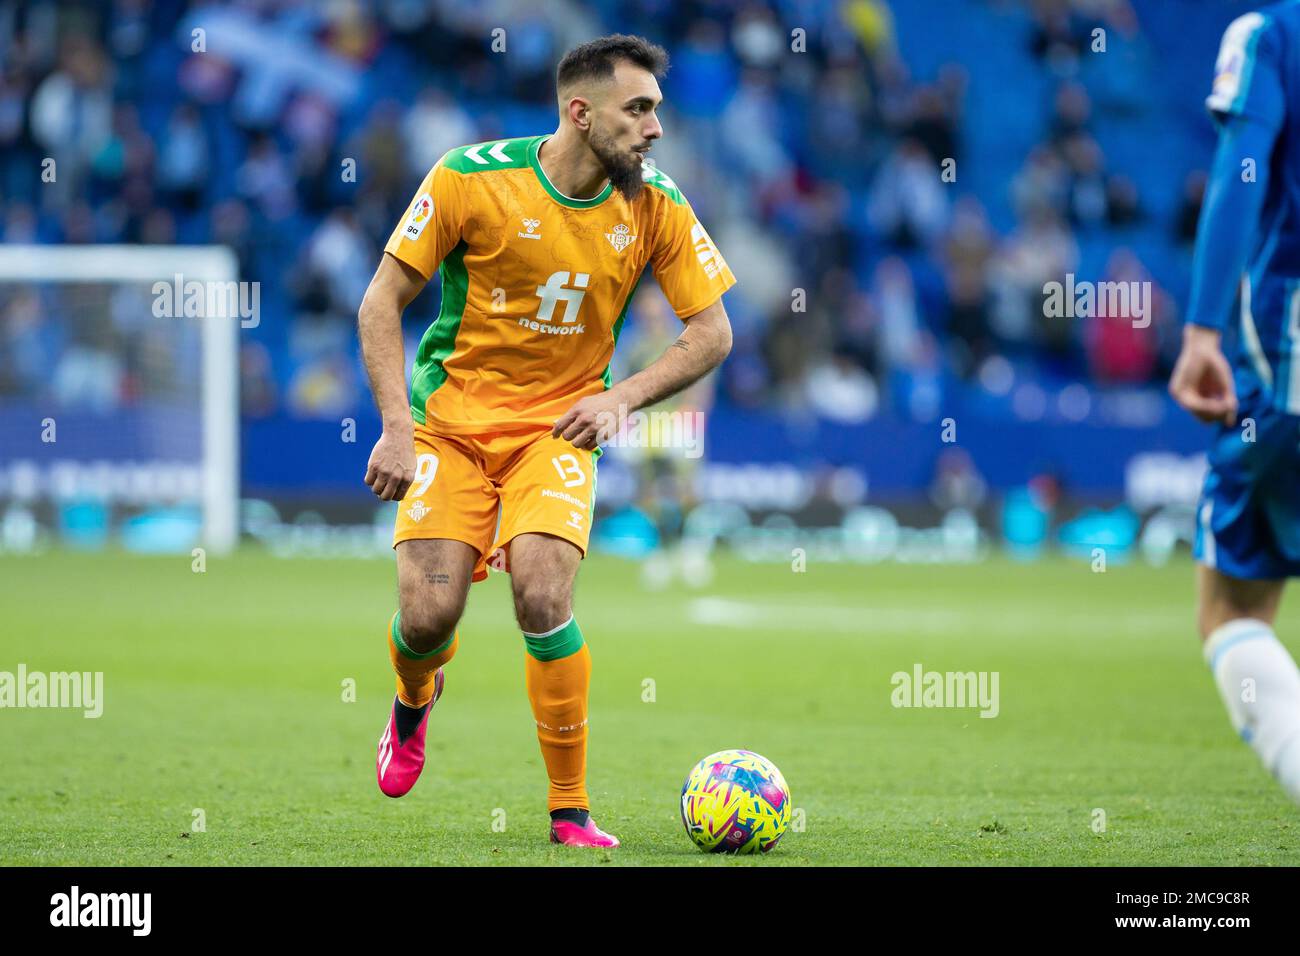 Borja Iglesias of Real Betis during the Liga match between RCD Espanyol and Real Betis at RCDE Stadium in Cornella, Spain. Stock Photo